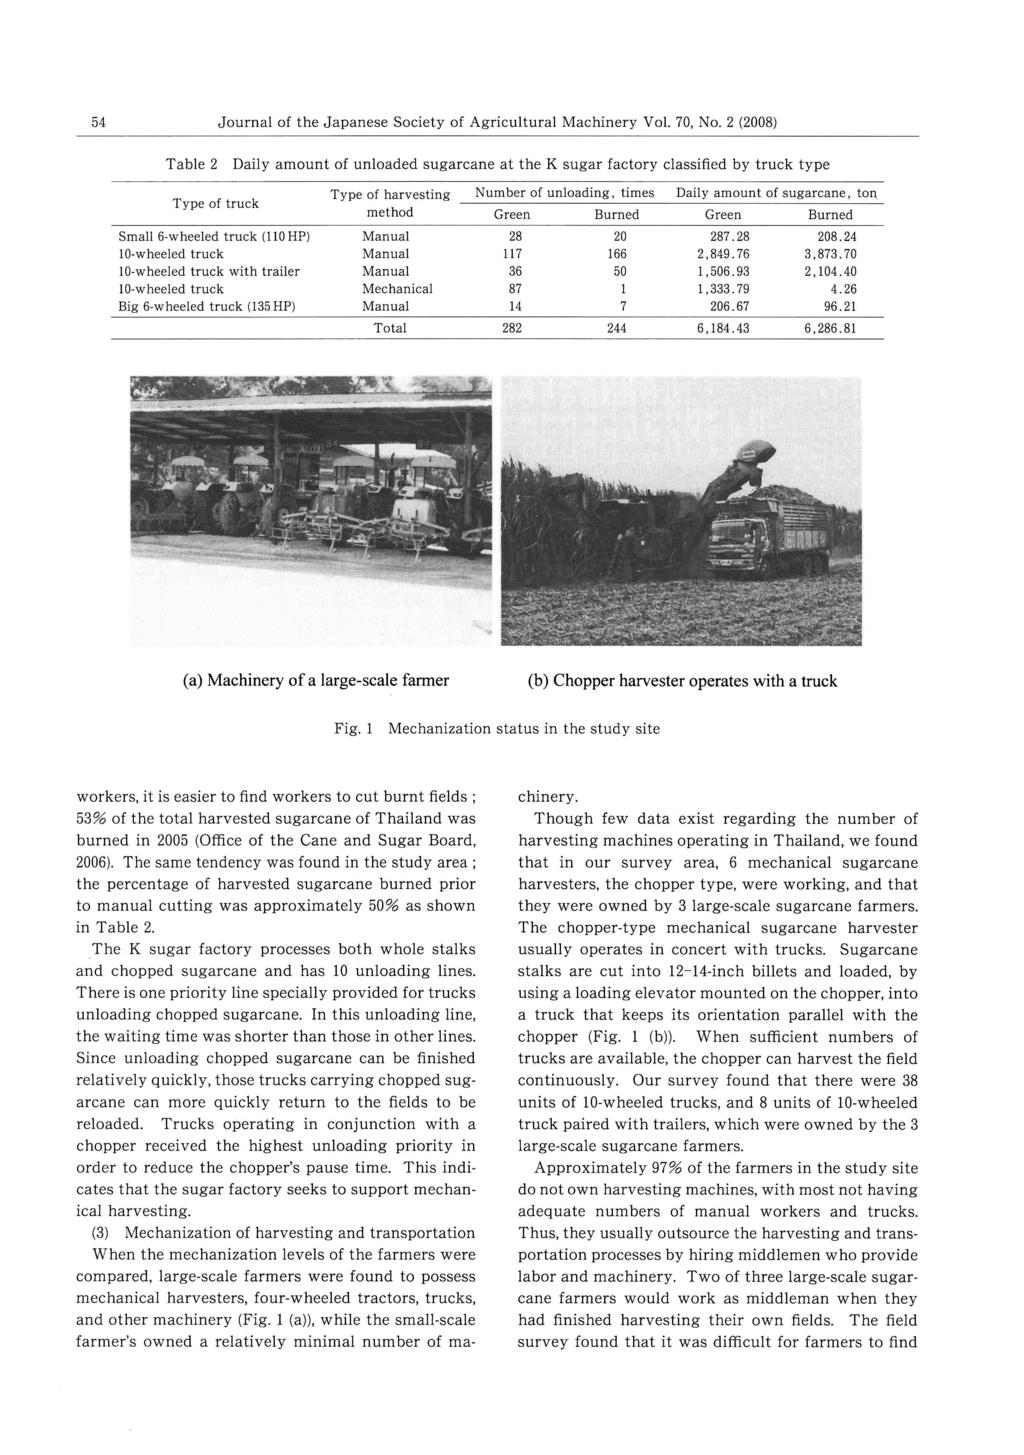 54 Journal Table 2 Daily of the amount Japanese Society of unloaded of Agricultural at the K sugar (a) Machinery of a large-scale farmer Fig.